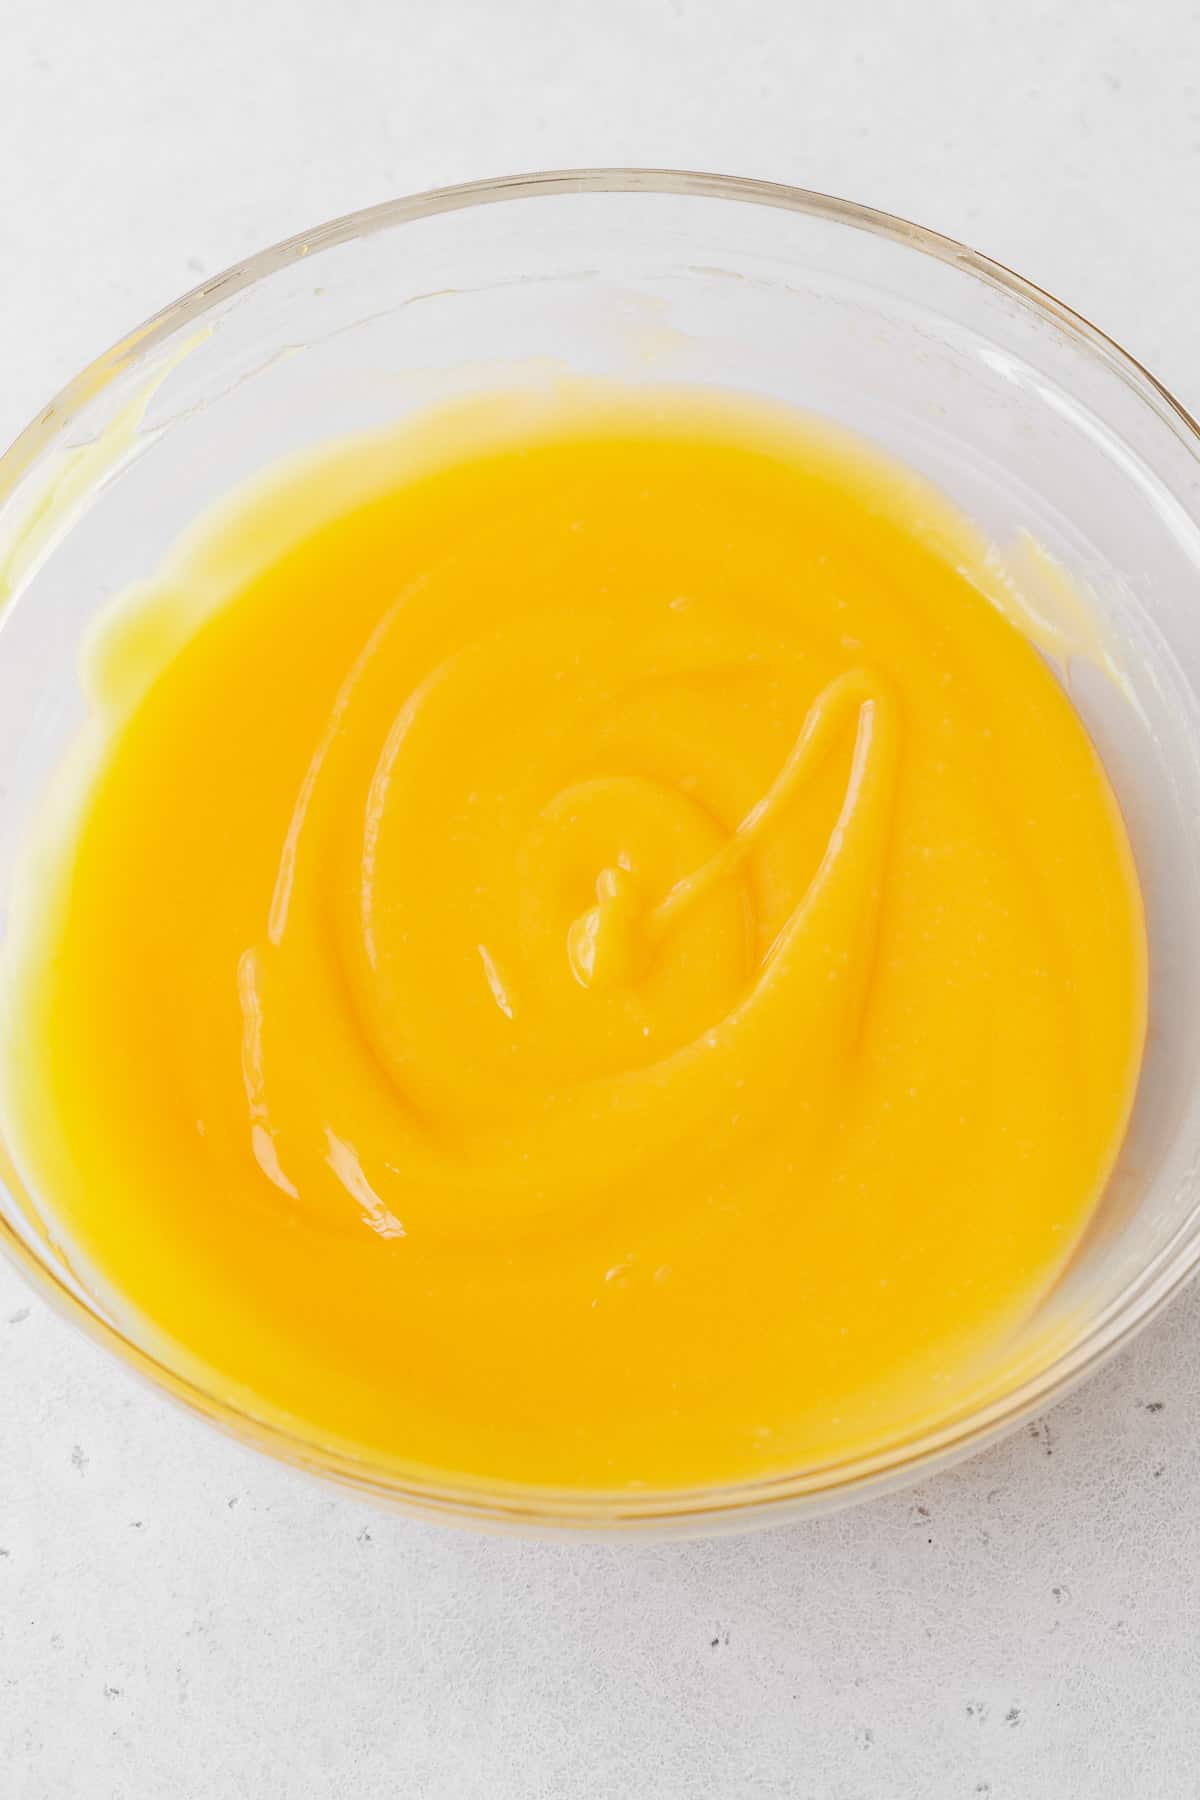 The lemon curd filling whisked up in a glass mixing bowl.